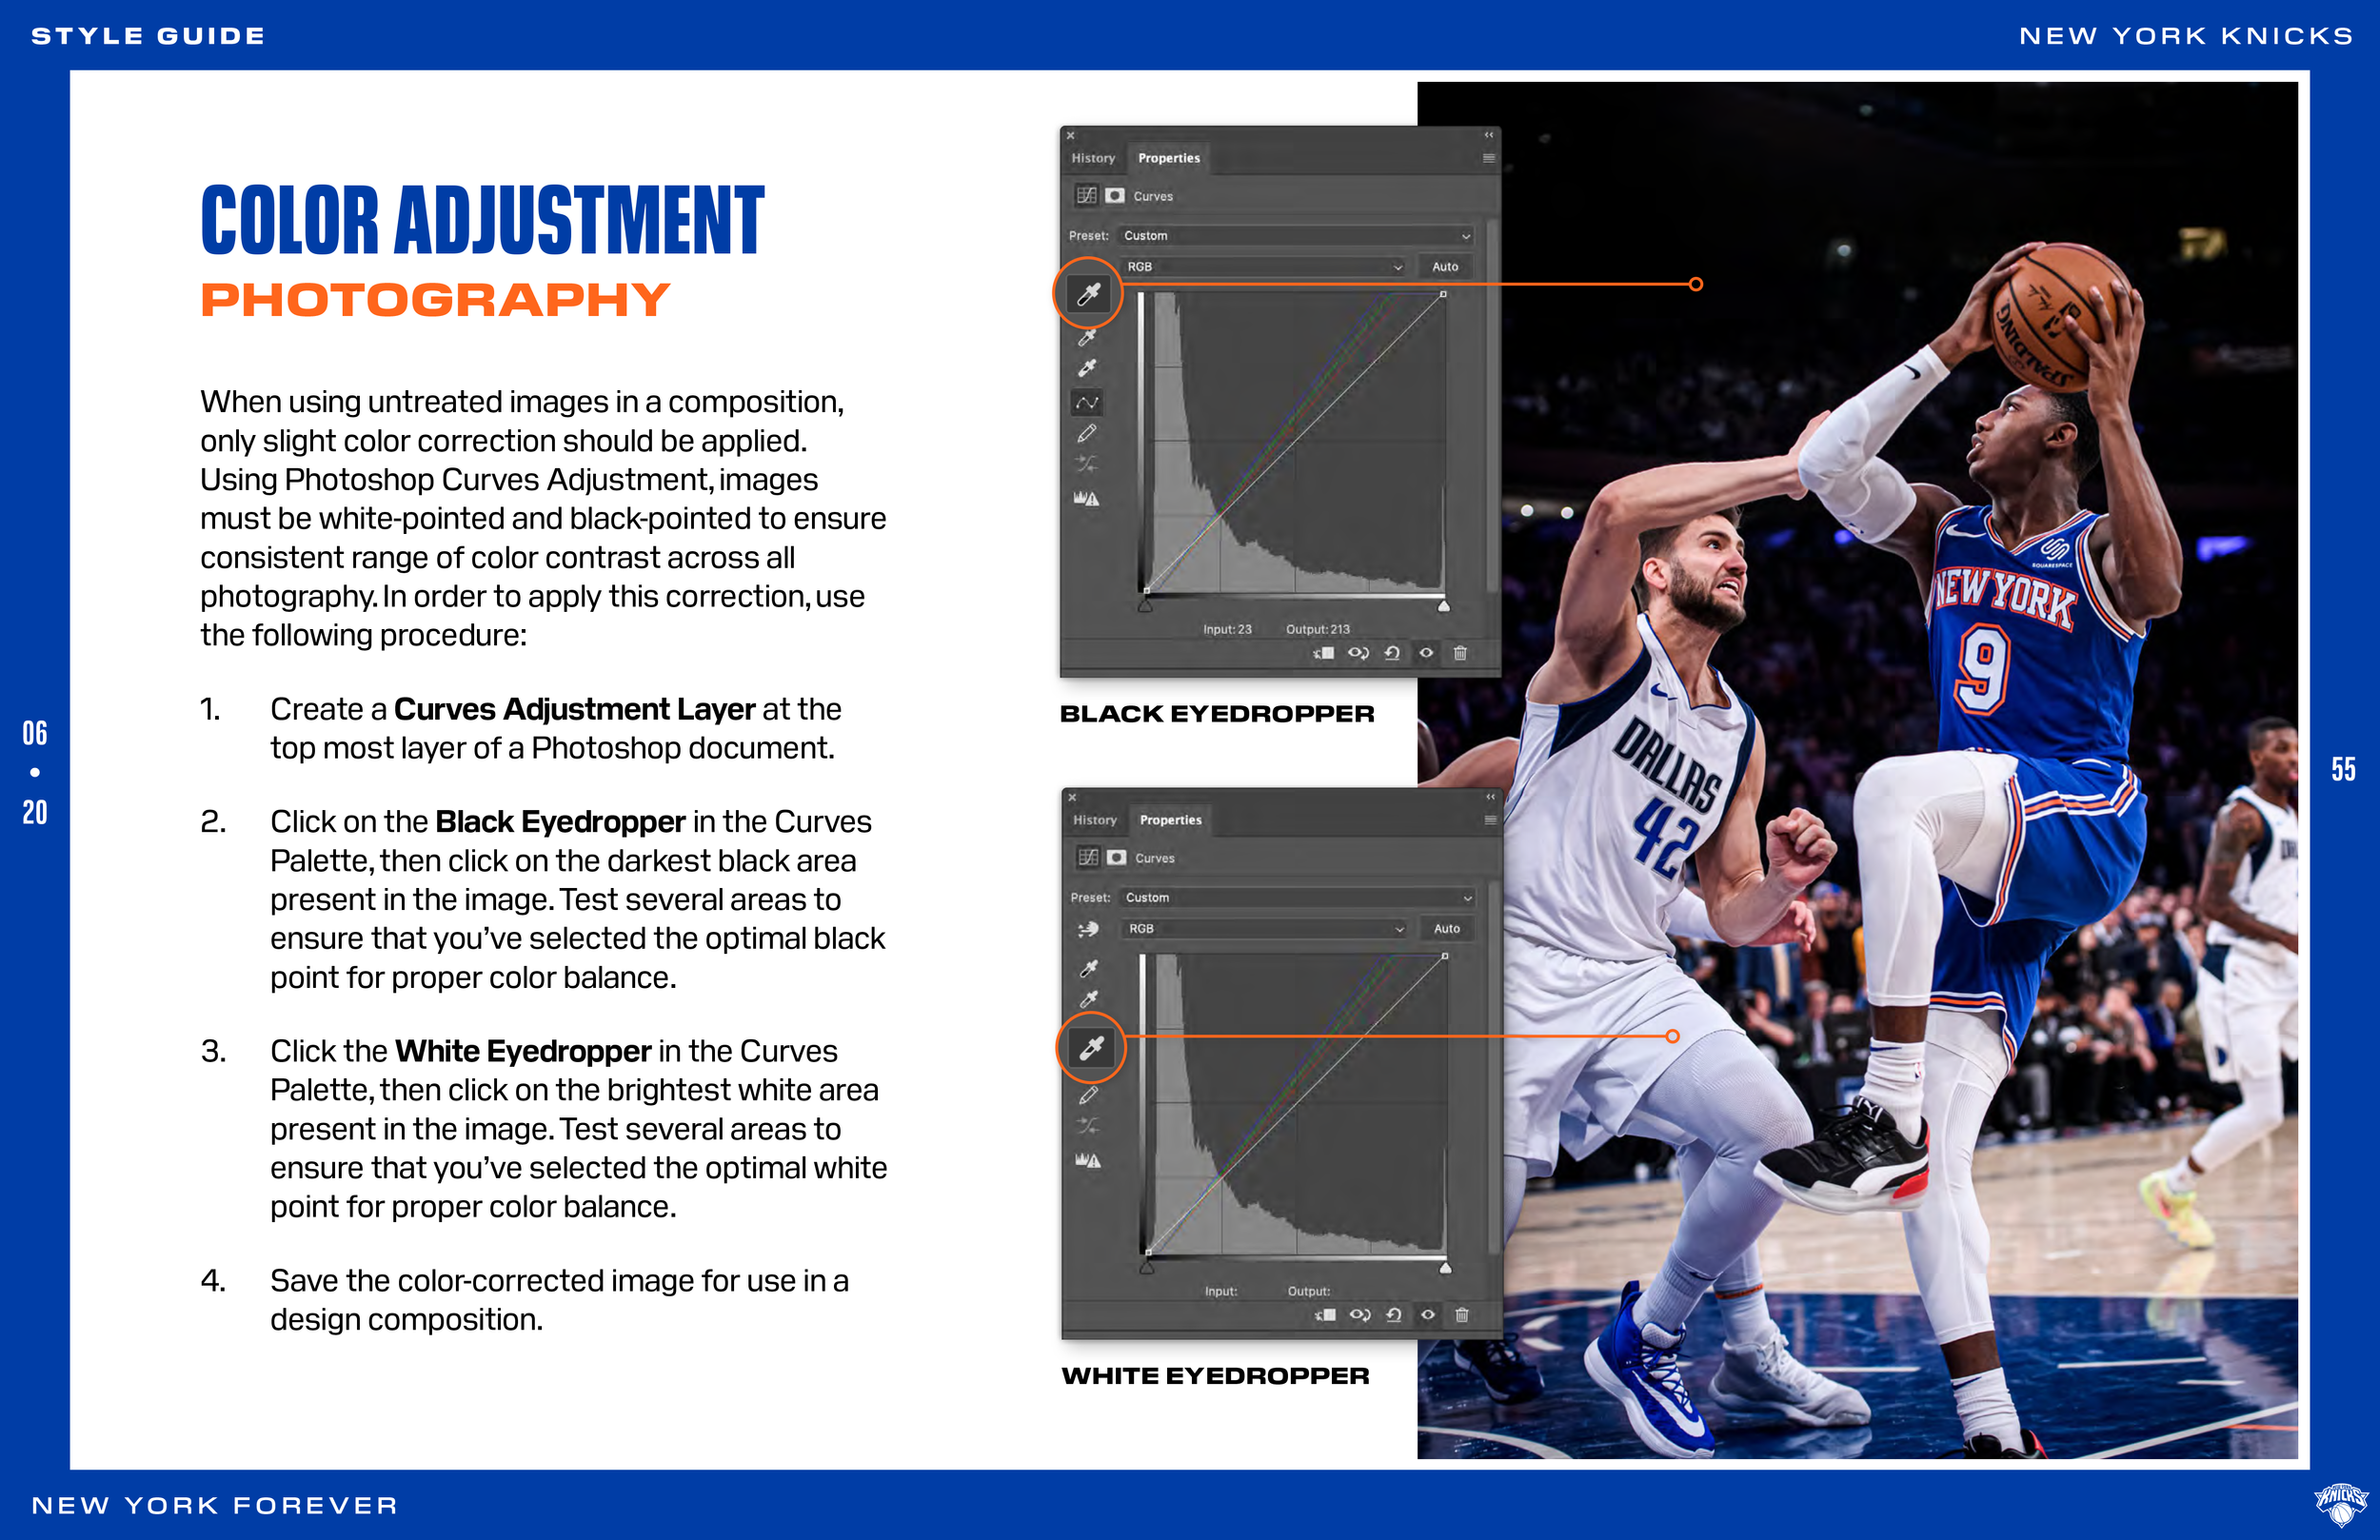 Pages from KNICKS_StyleGuide_062420 55.png